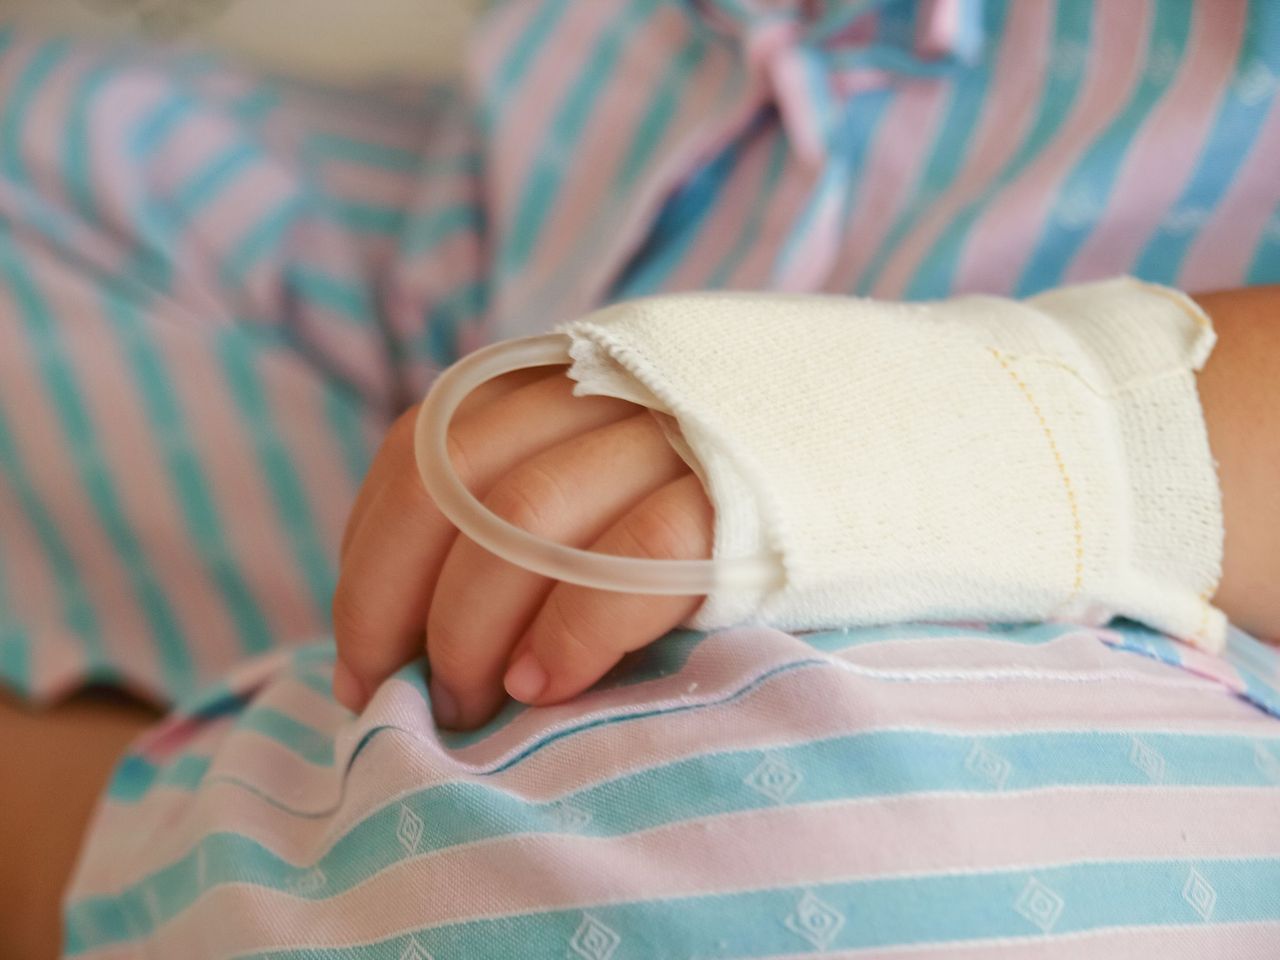 A dextrose inserted on a child's arm. | Source: Shutterstock